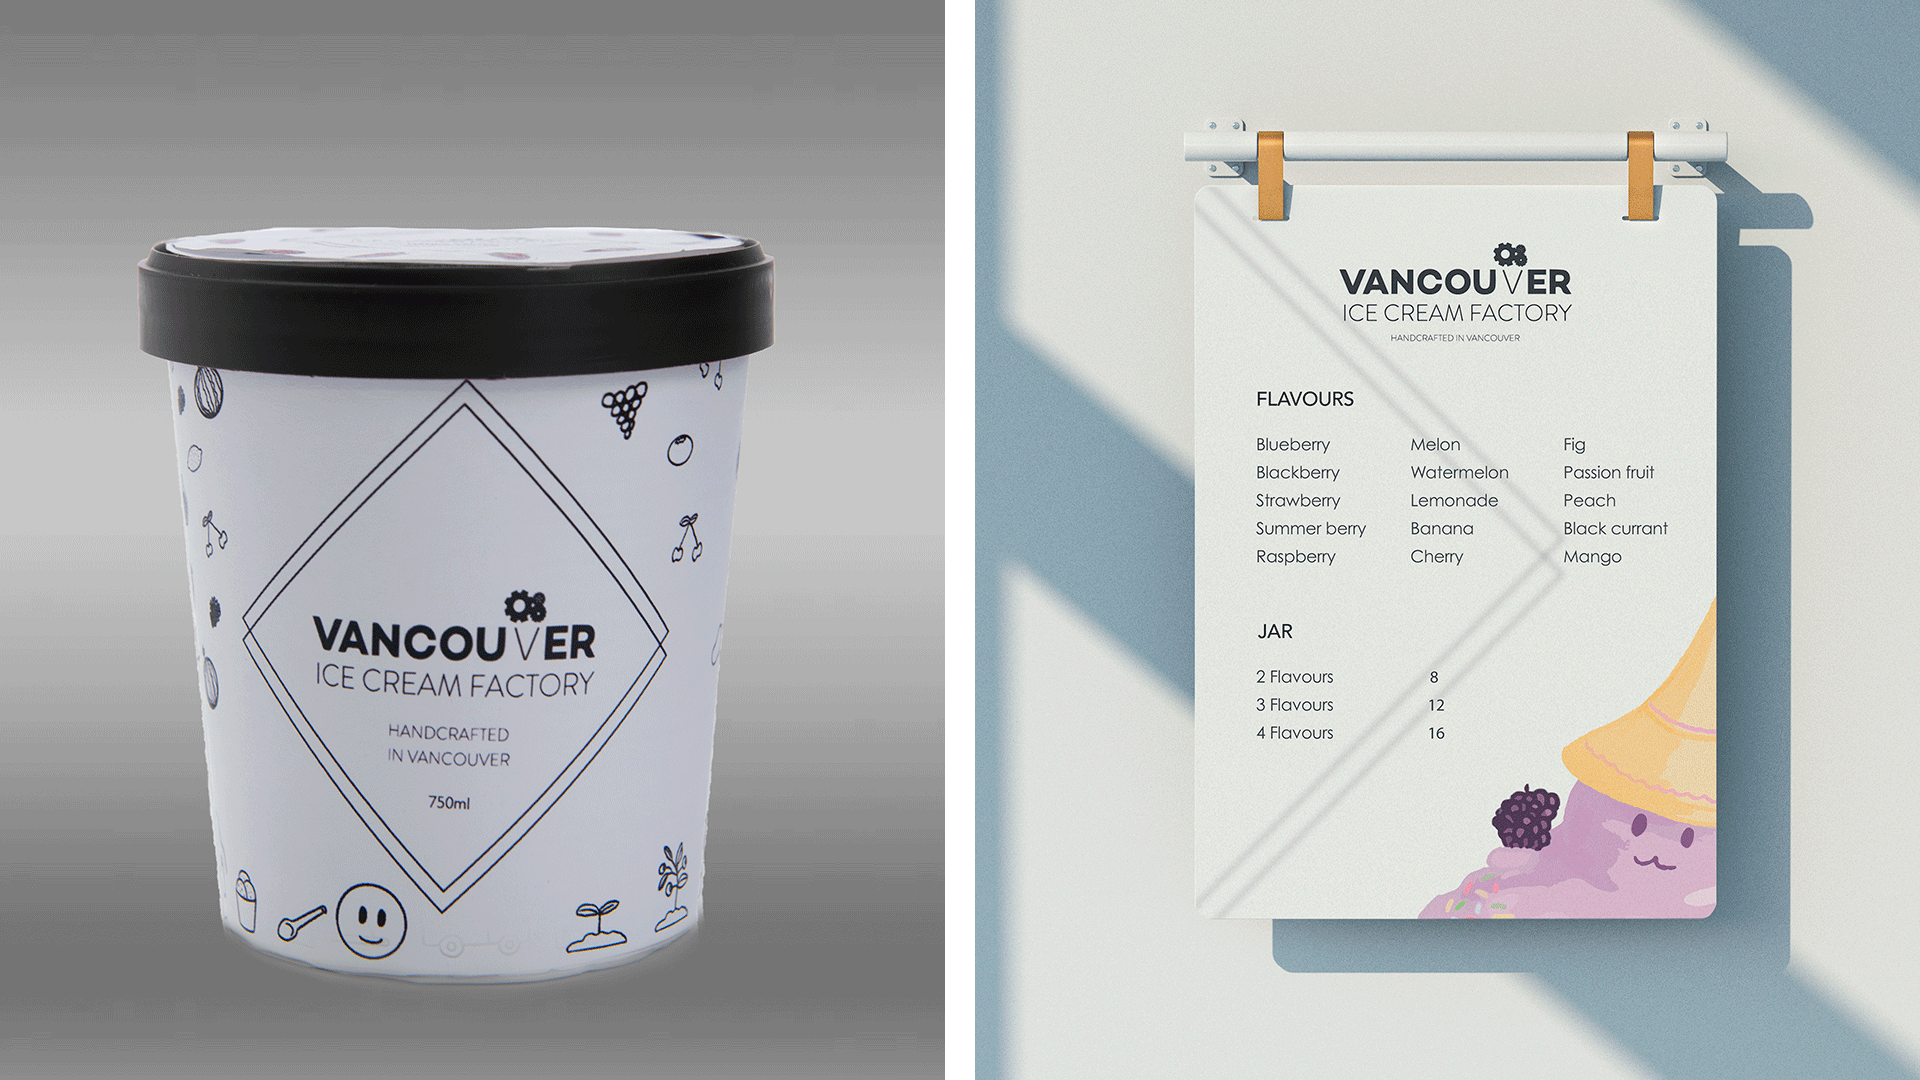 GIFs showing front and back views of an ice cream bucket on the left, and a menu and t-shirt on the right.